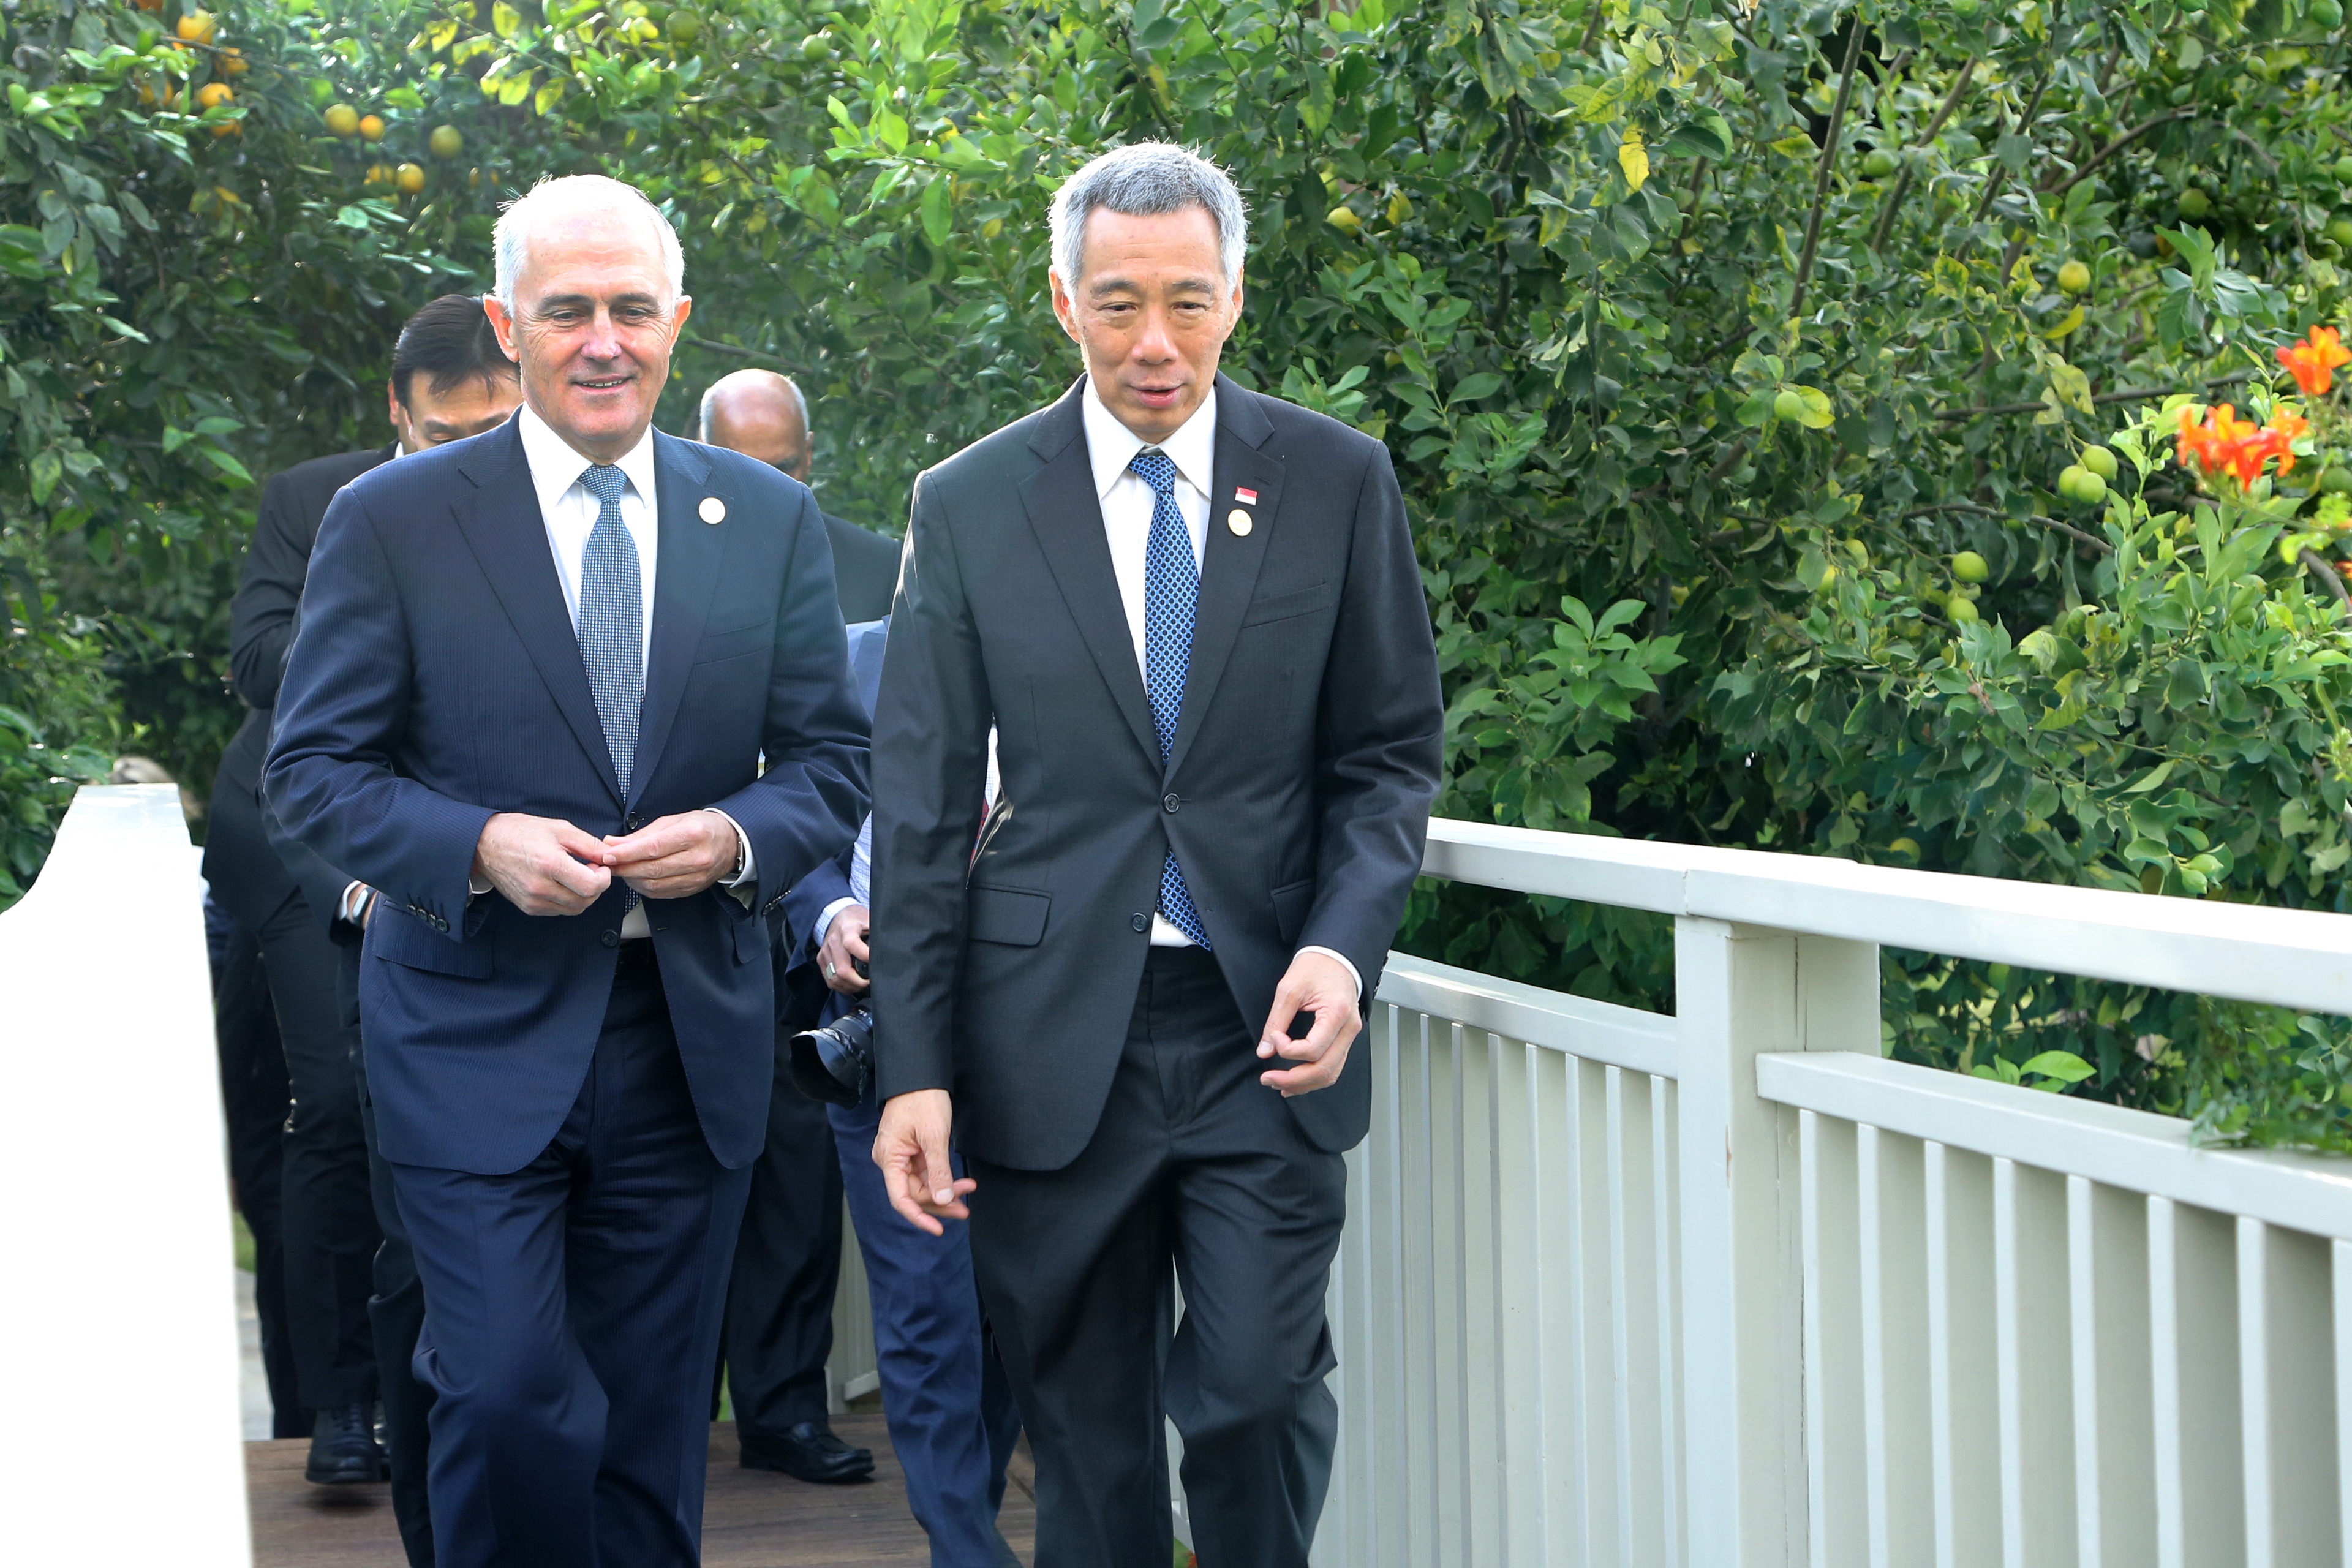 Prime Minister Lee Hsien Loong at the G20 Summit in November 2015 in Antalya Turkey (MCI Photo by Kenji Soon)